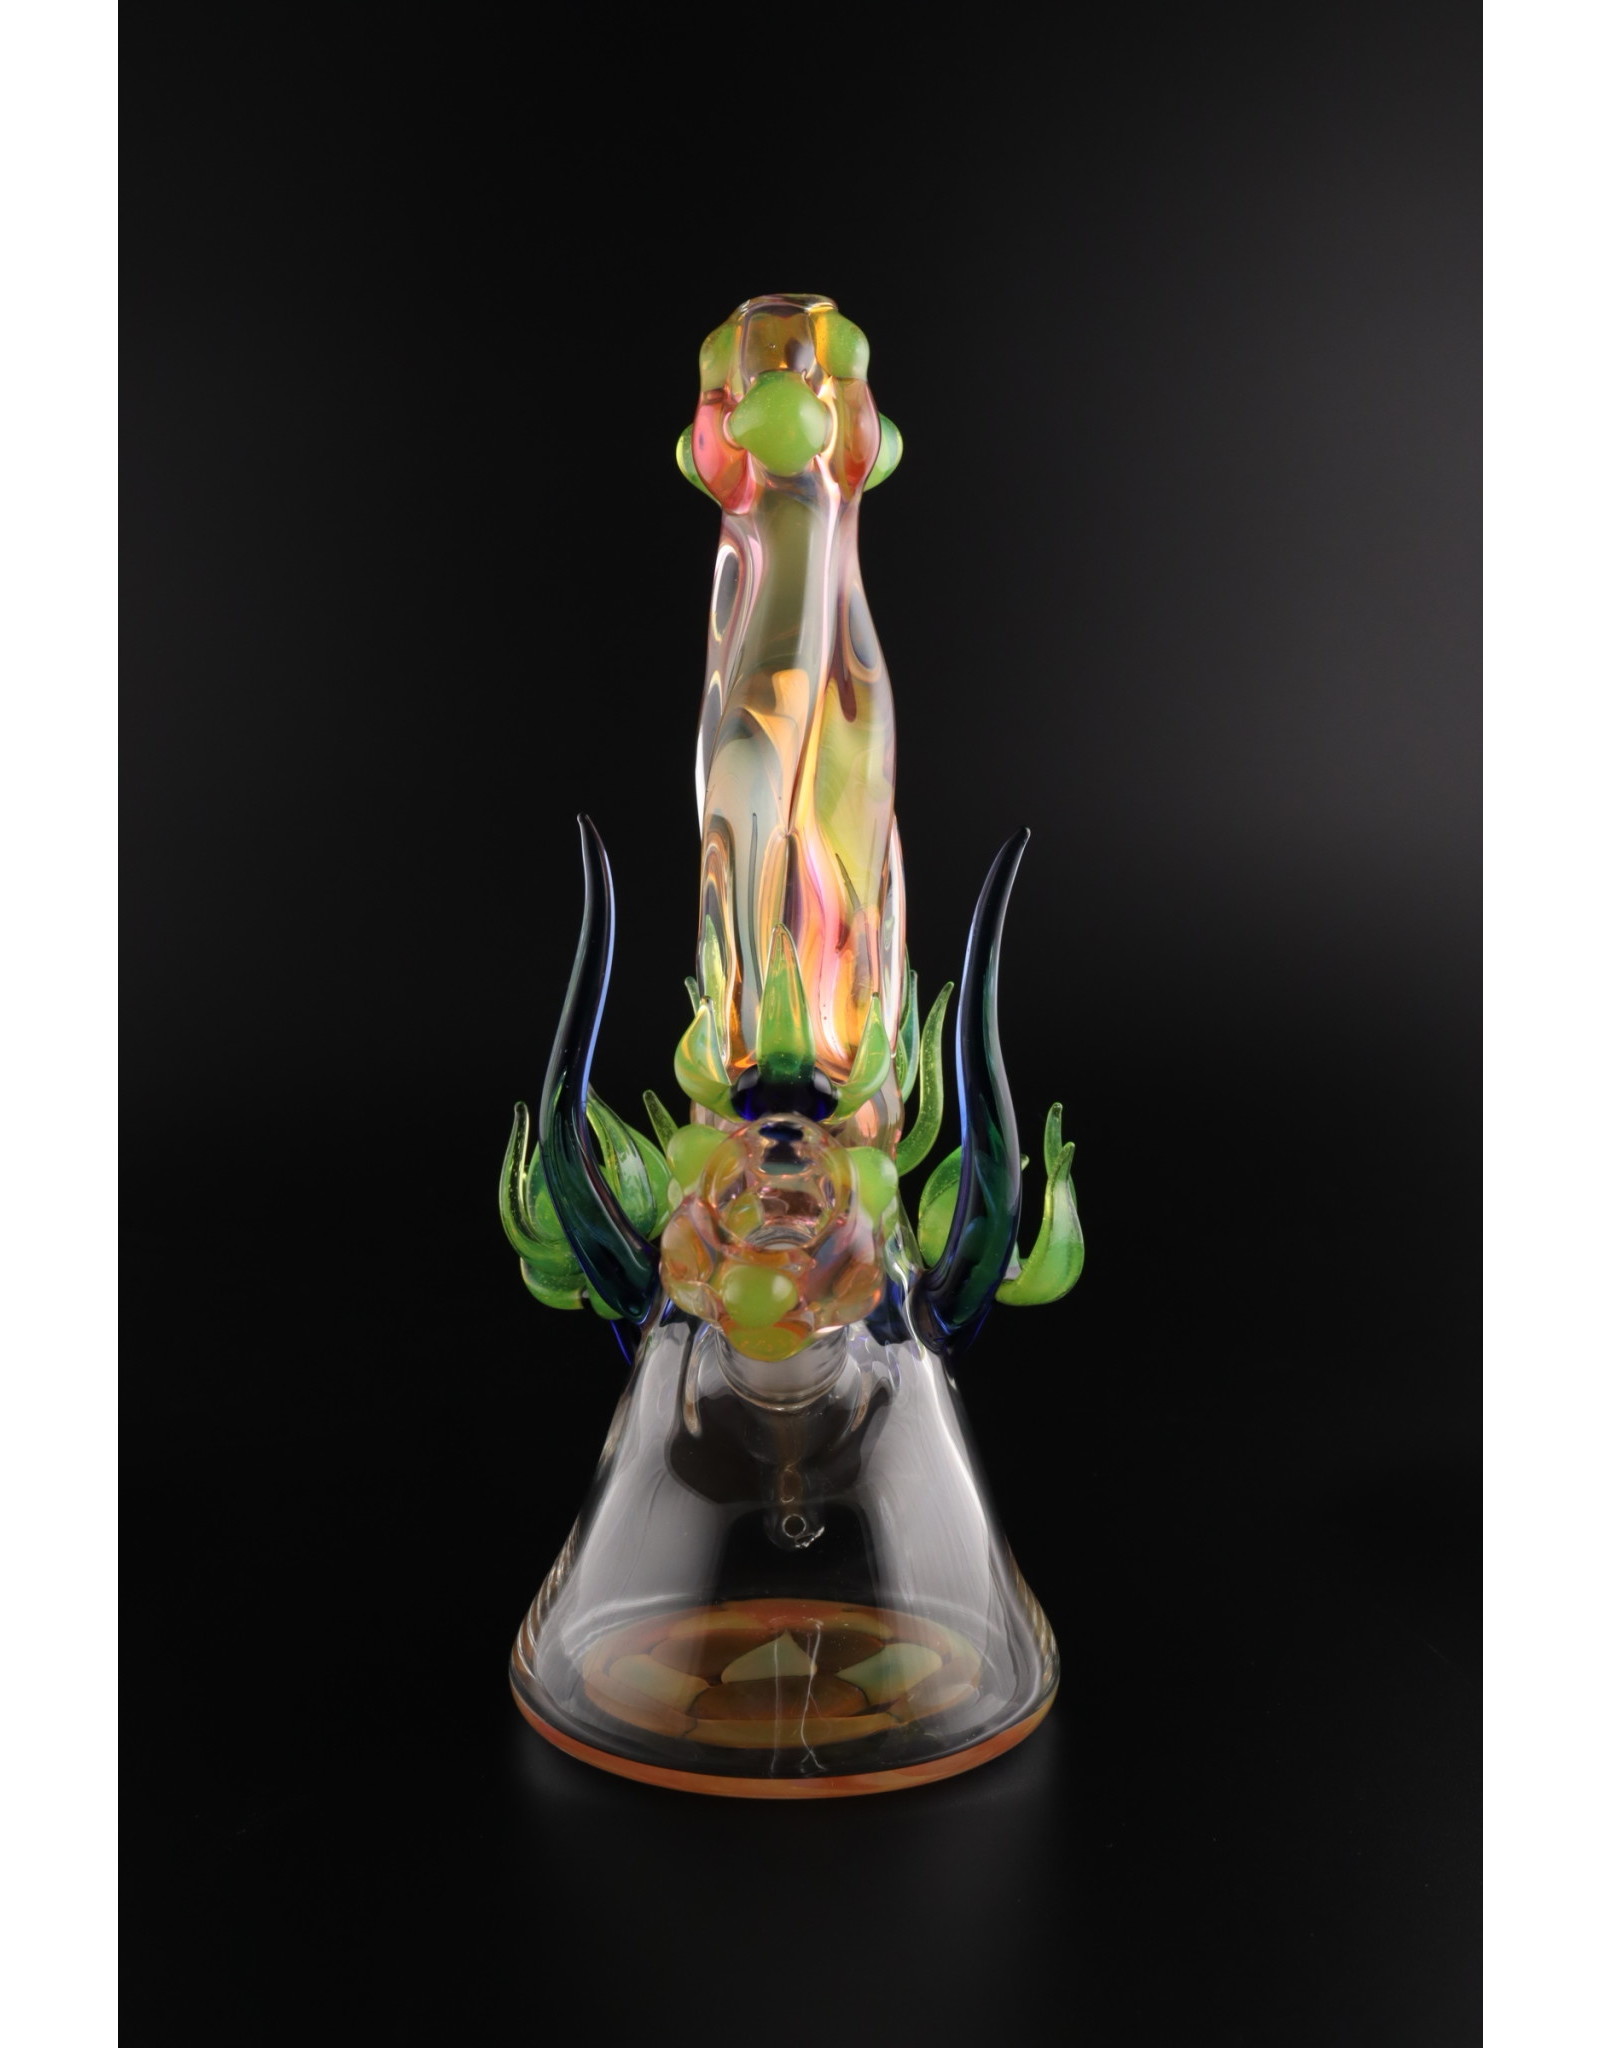 Old Country Blew Glass Lumpty Heady Slyme Rig  Water Pipe